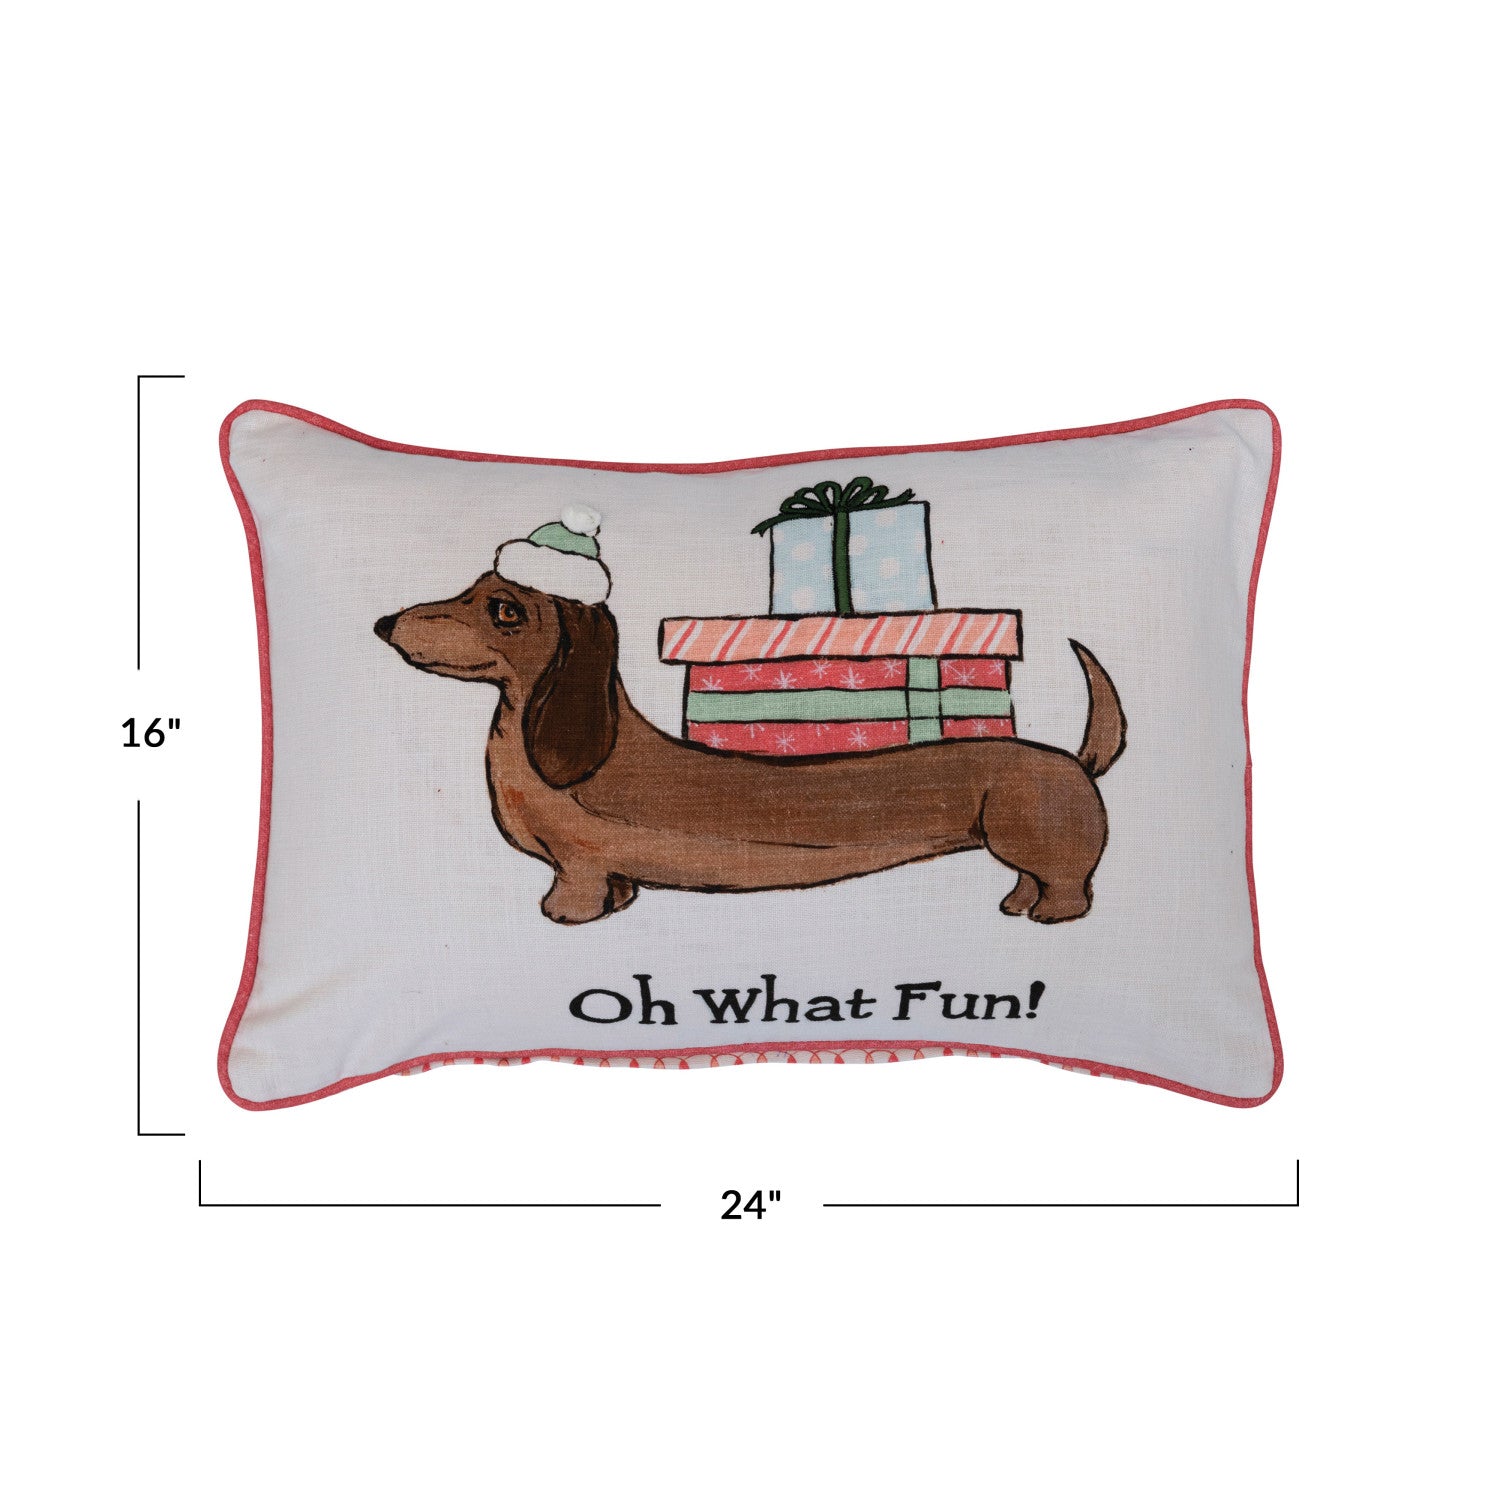 Dog In Hat Lumbar Pillow-Sister Shirts-Sister Shirts, Cute & Custom Tees for Mama & Littles in Trussville, Alabama.